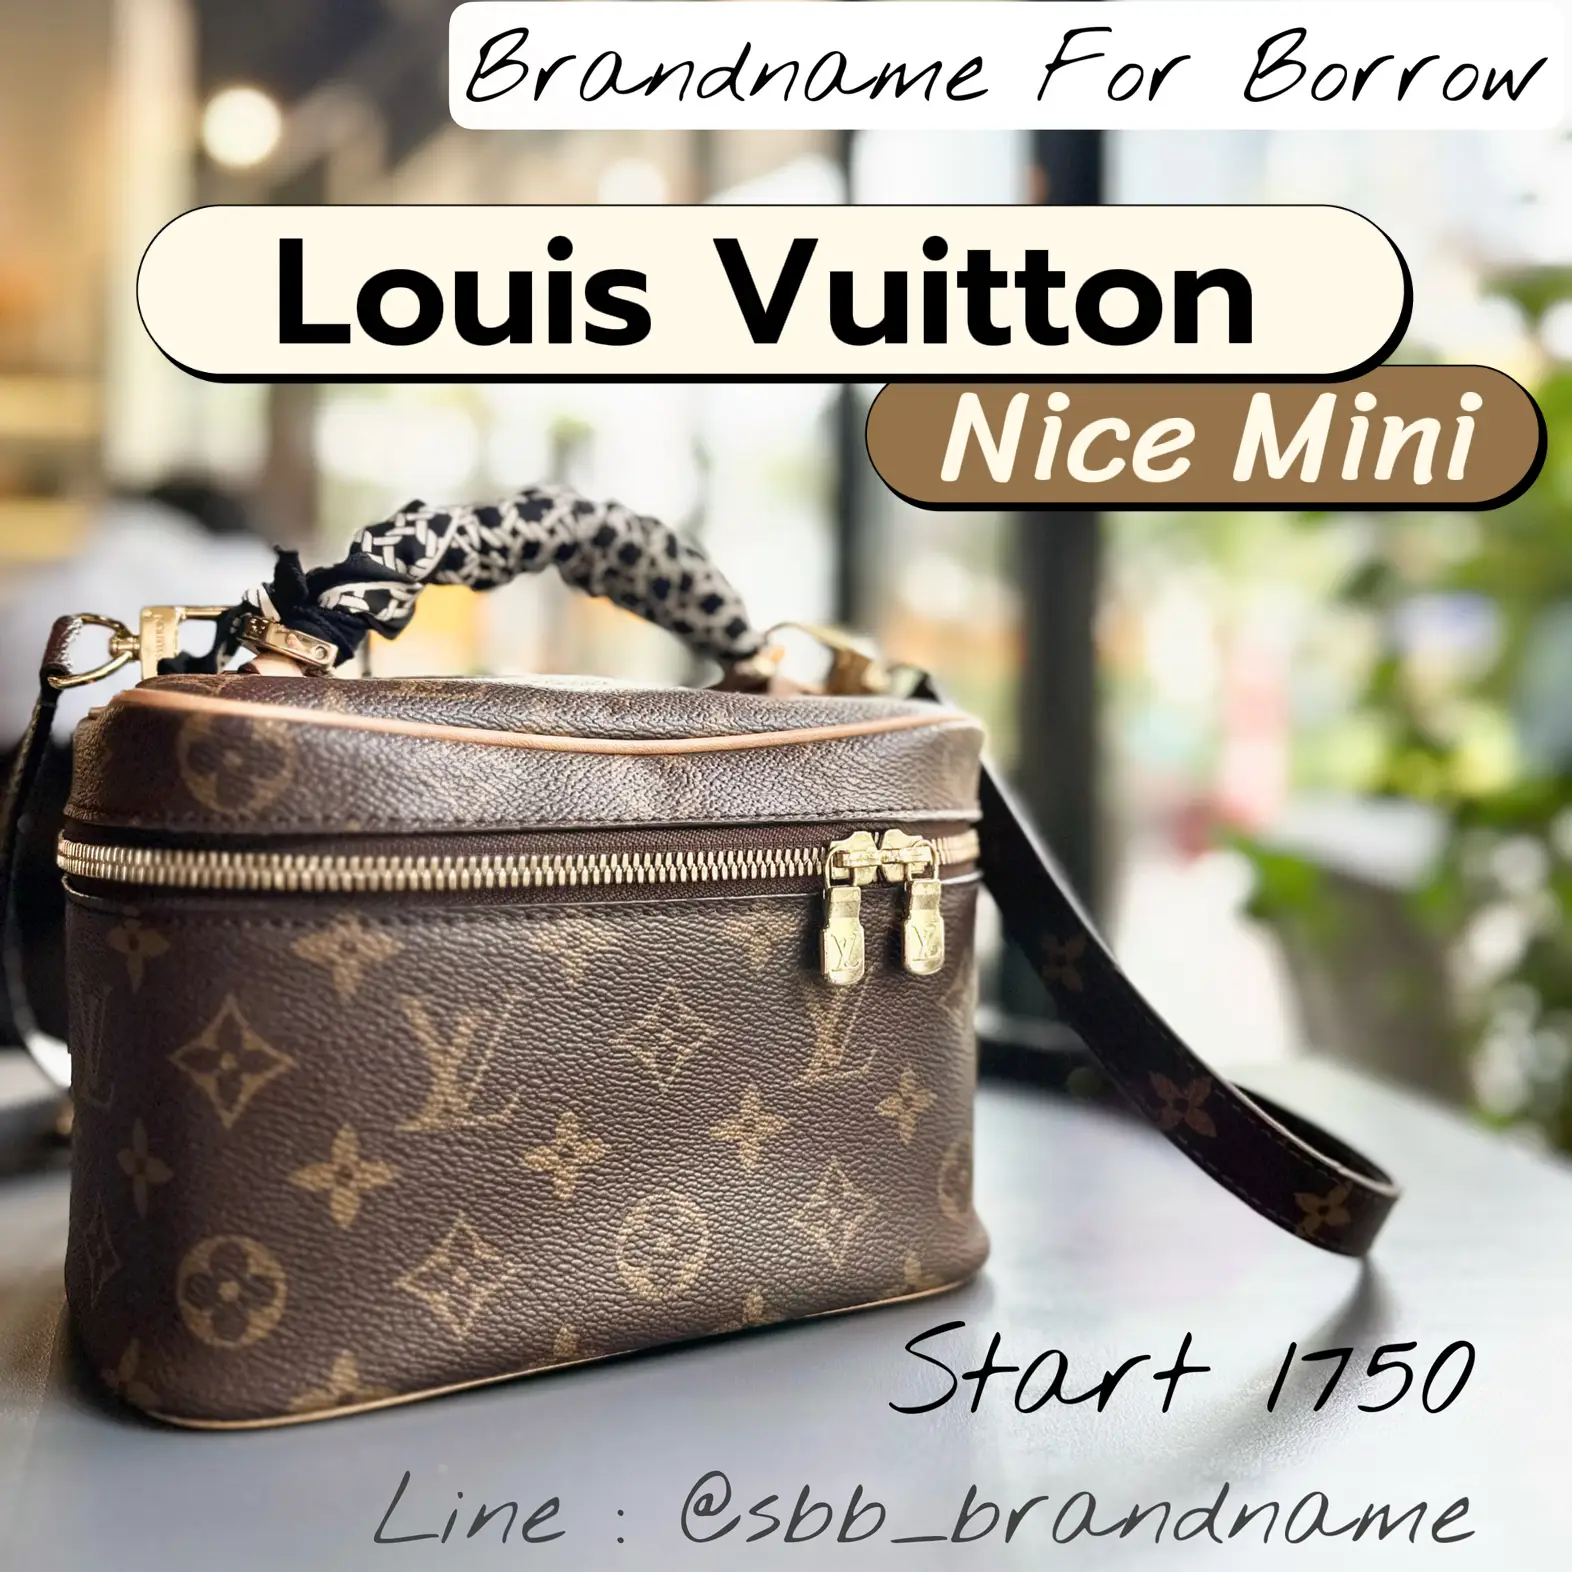 Since mini bags are in. What do we think of the Nano Noe? #louisvuitto